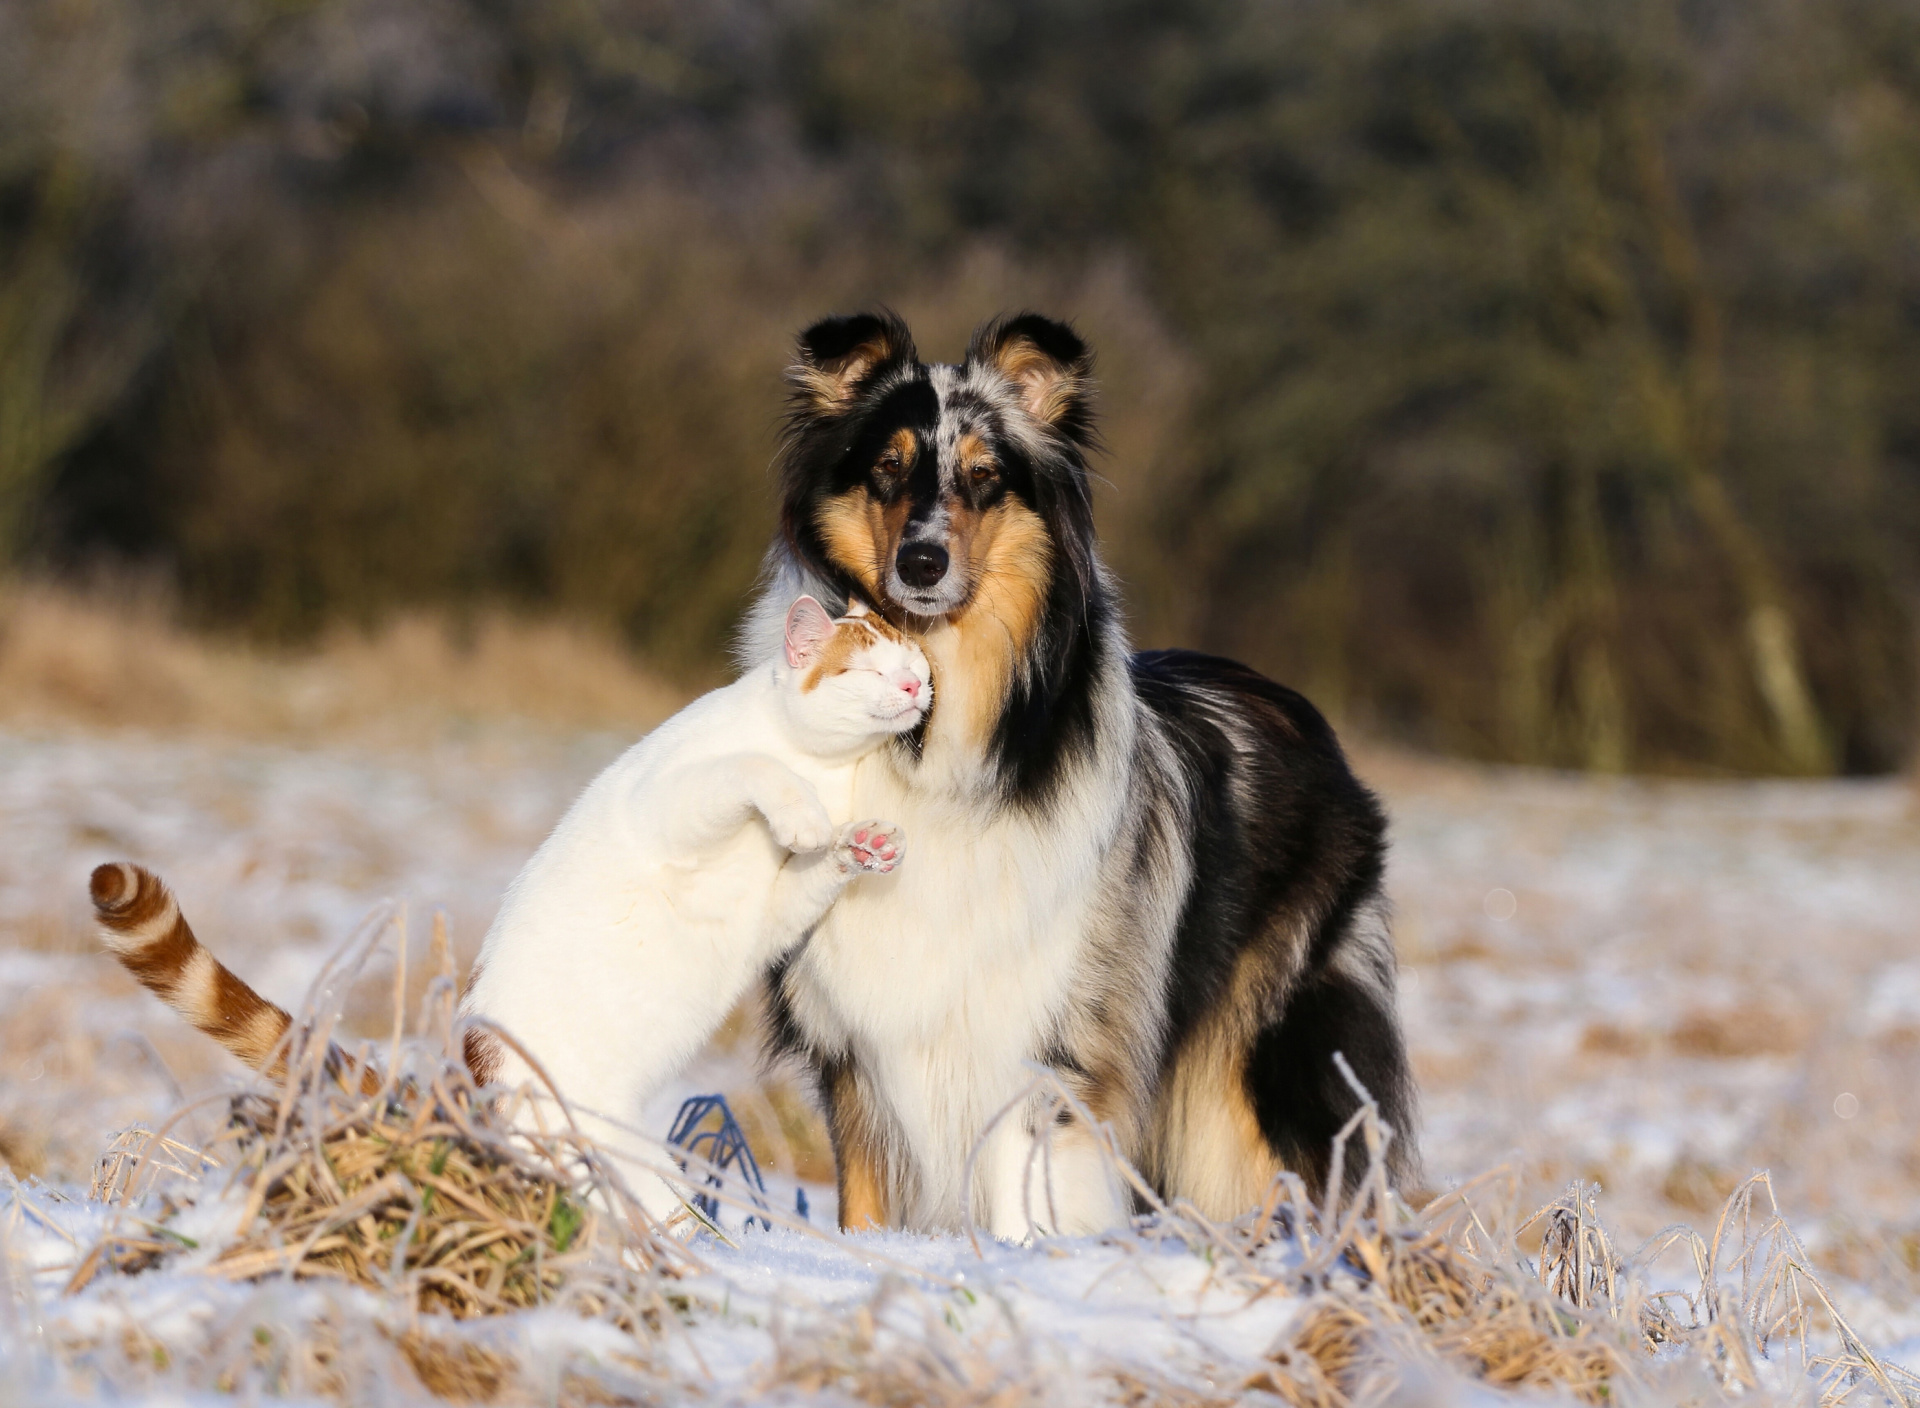 Friendship Cat and Dog Collie wallpaper 1920x1408